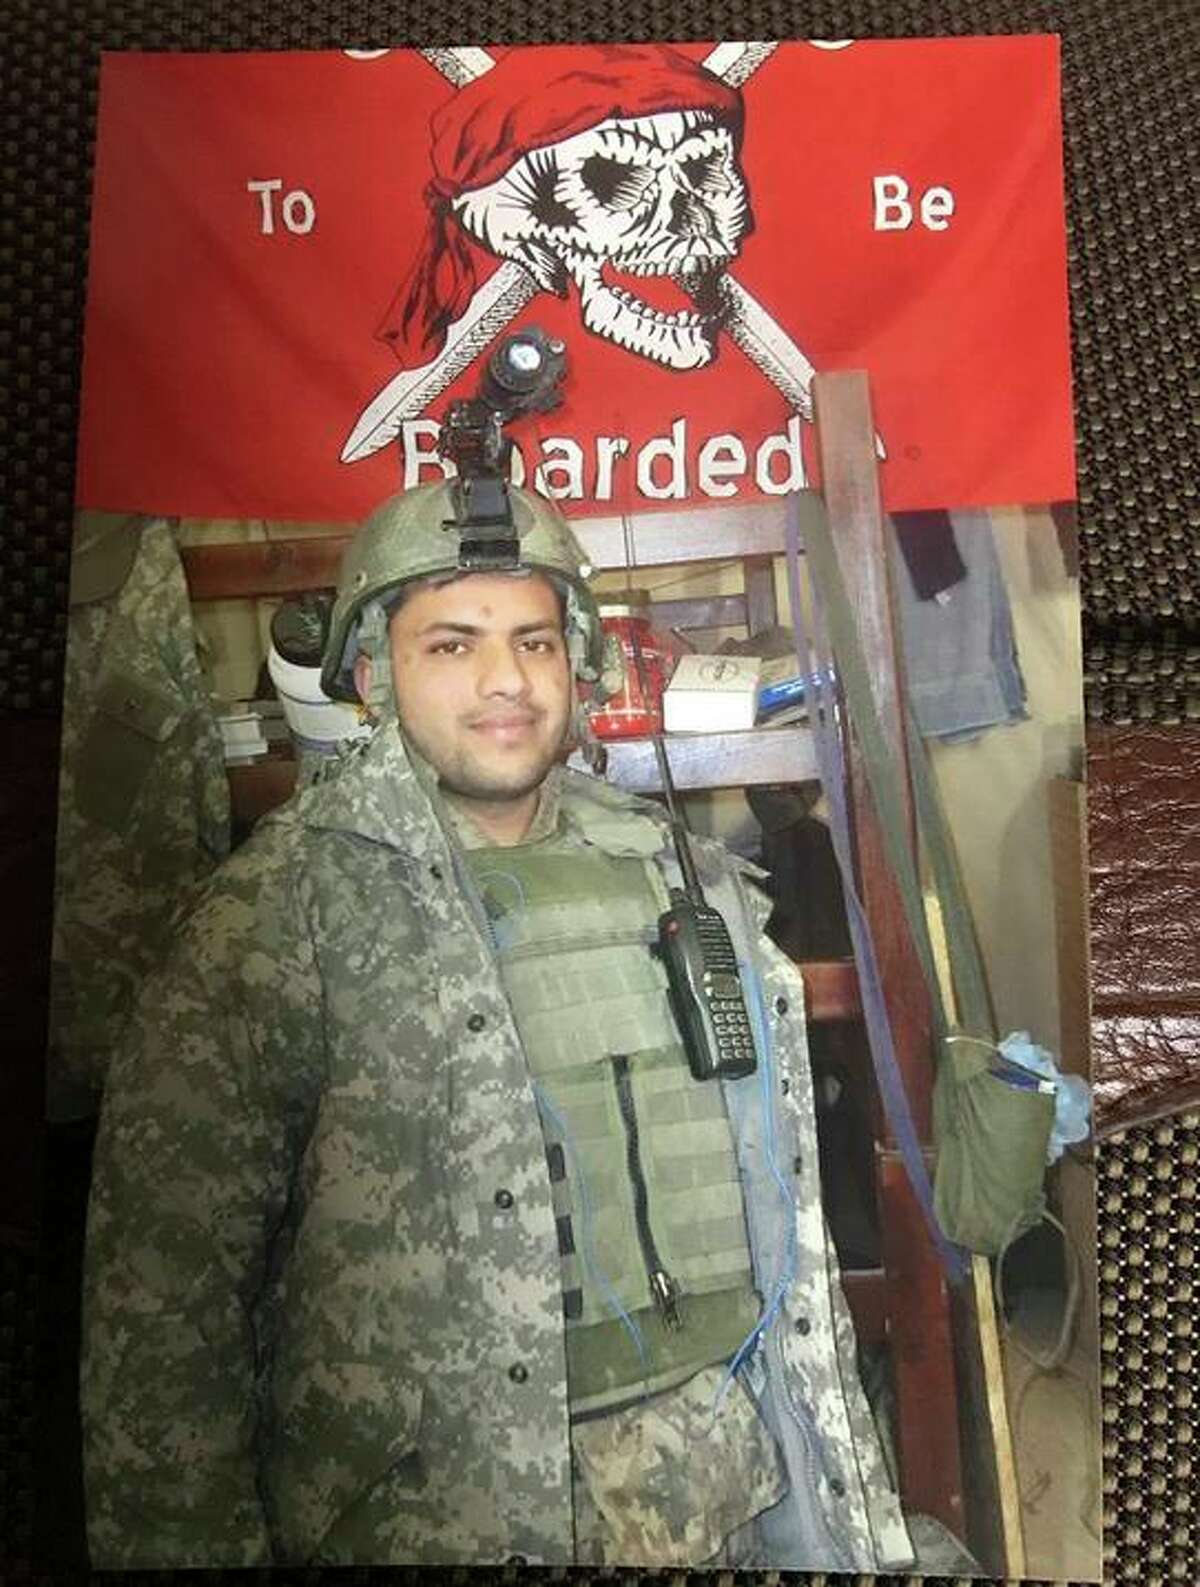 Amani was shot and killed by San Francisco police on Nov. 19 at the Covered Wagon Hotel in SoMa. He worked for a contractor with U.S. special forces in his native Afghanistan for five years and suffered from post-traumatic stress disorder.